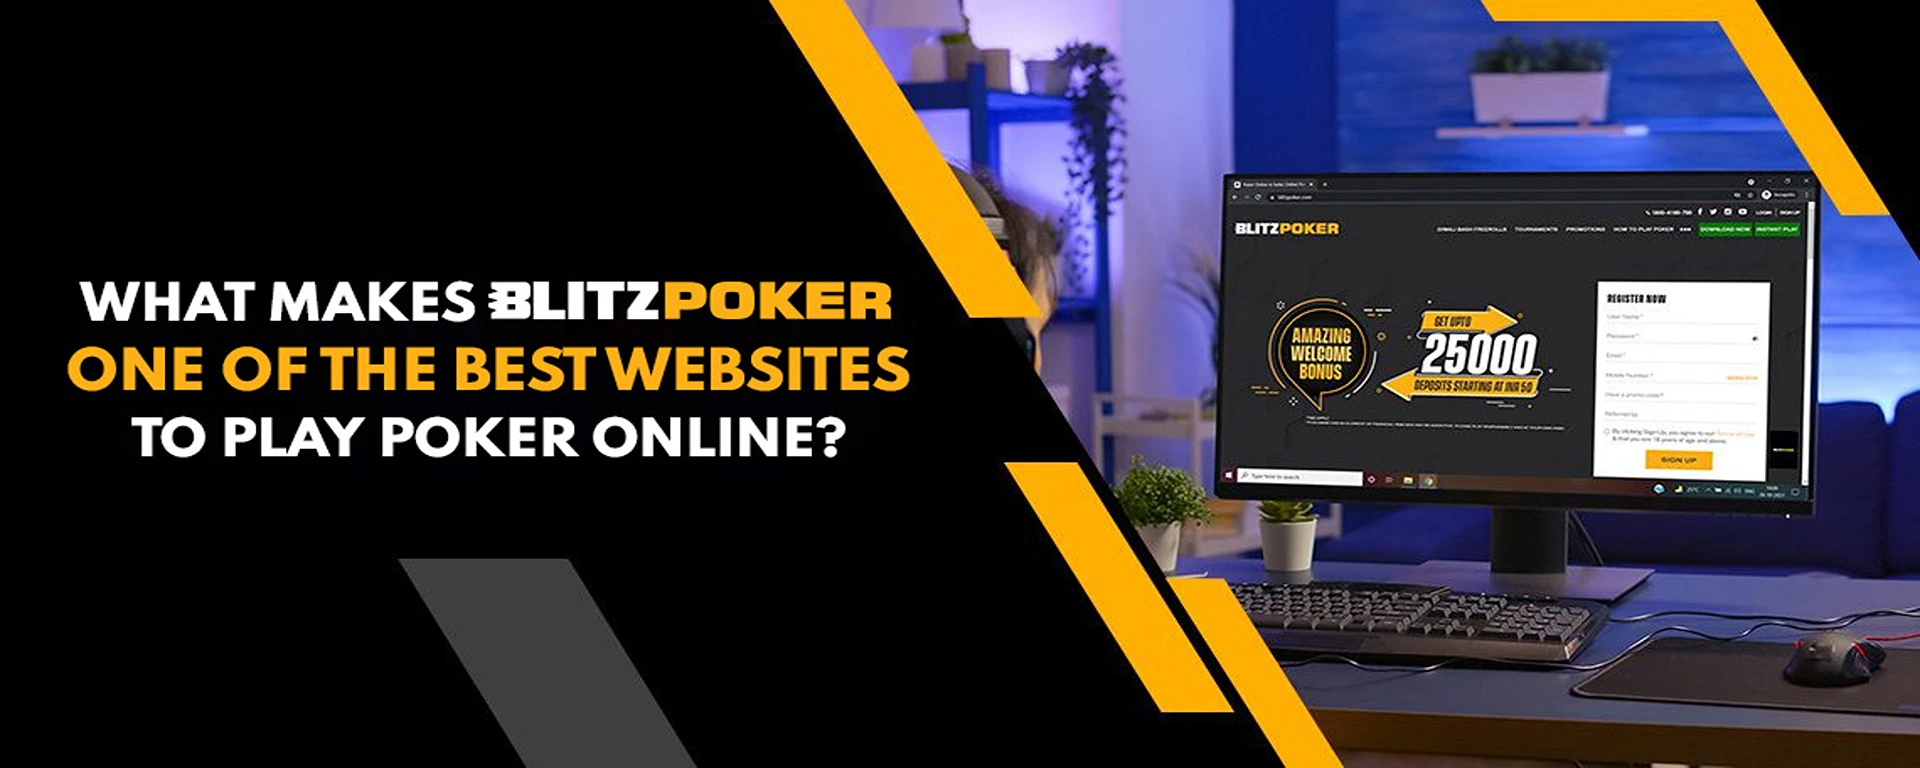 What Makes BLITZPOKER One of The Best Websites to Play Poker Online?